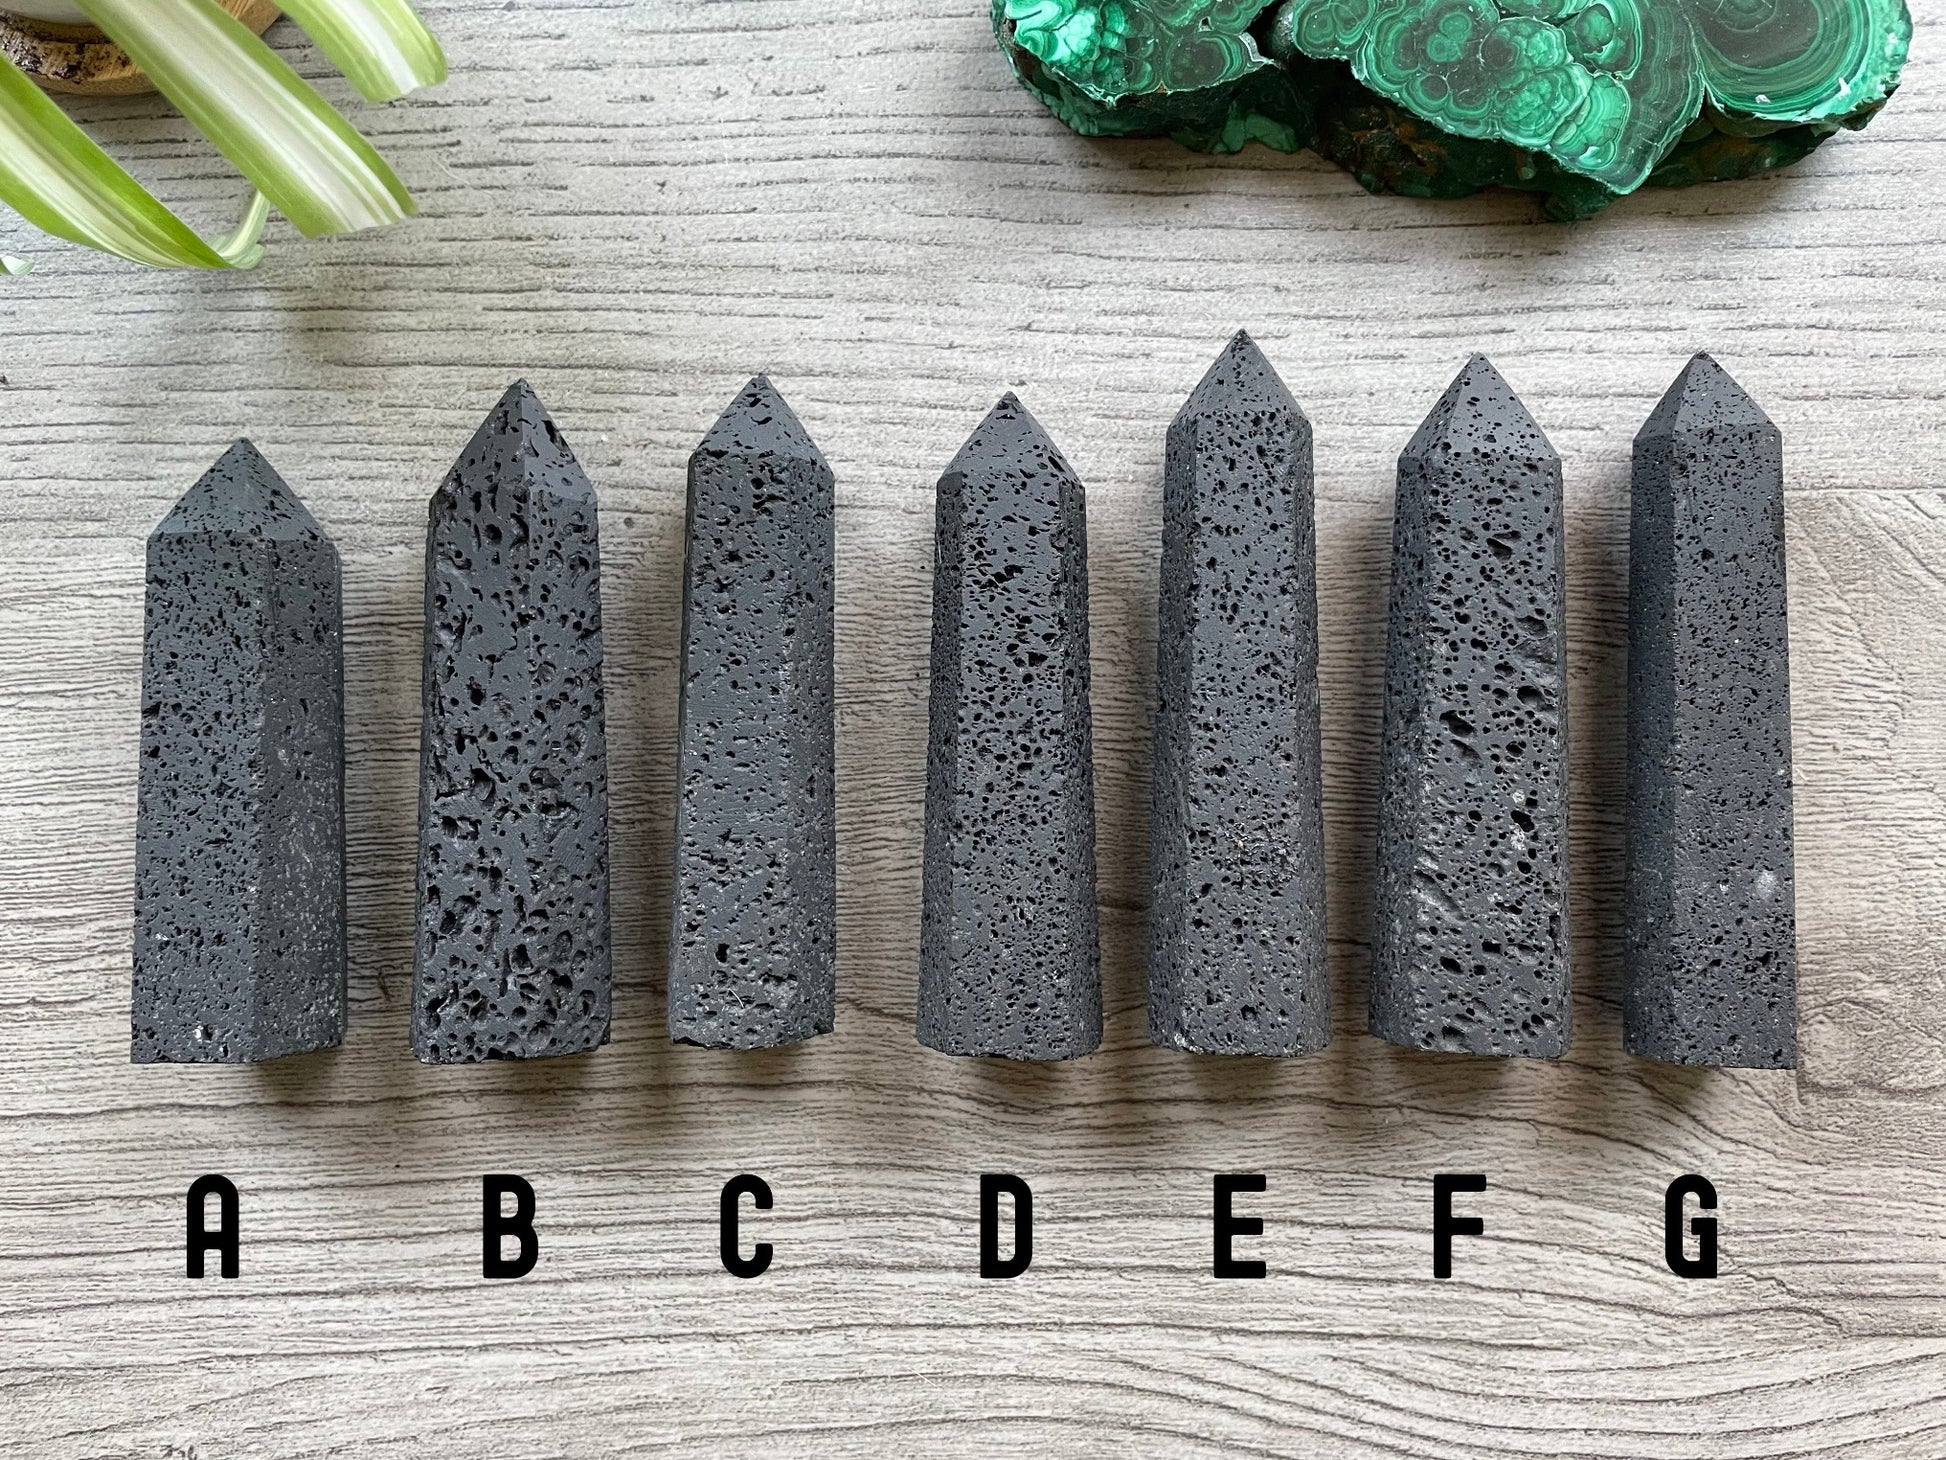 Pictured are various points of lava rock lava stone.